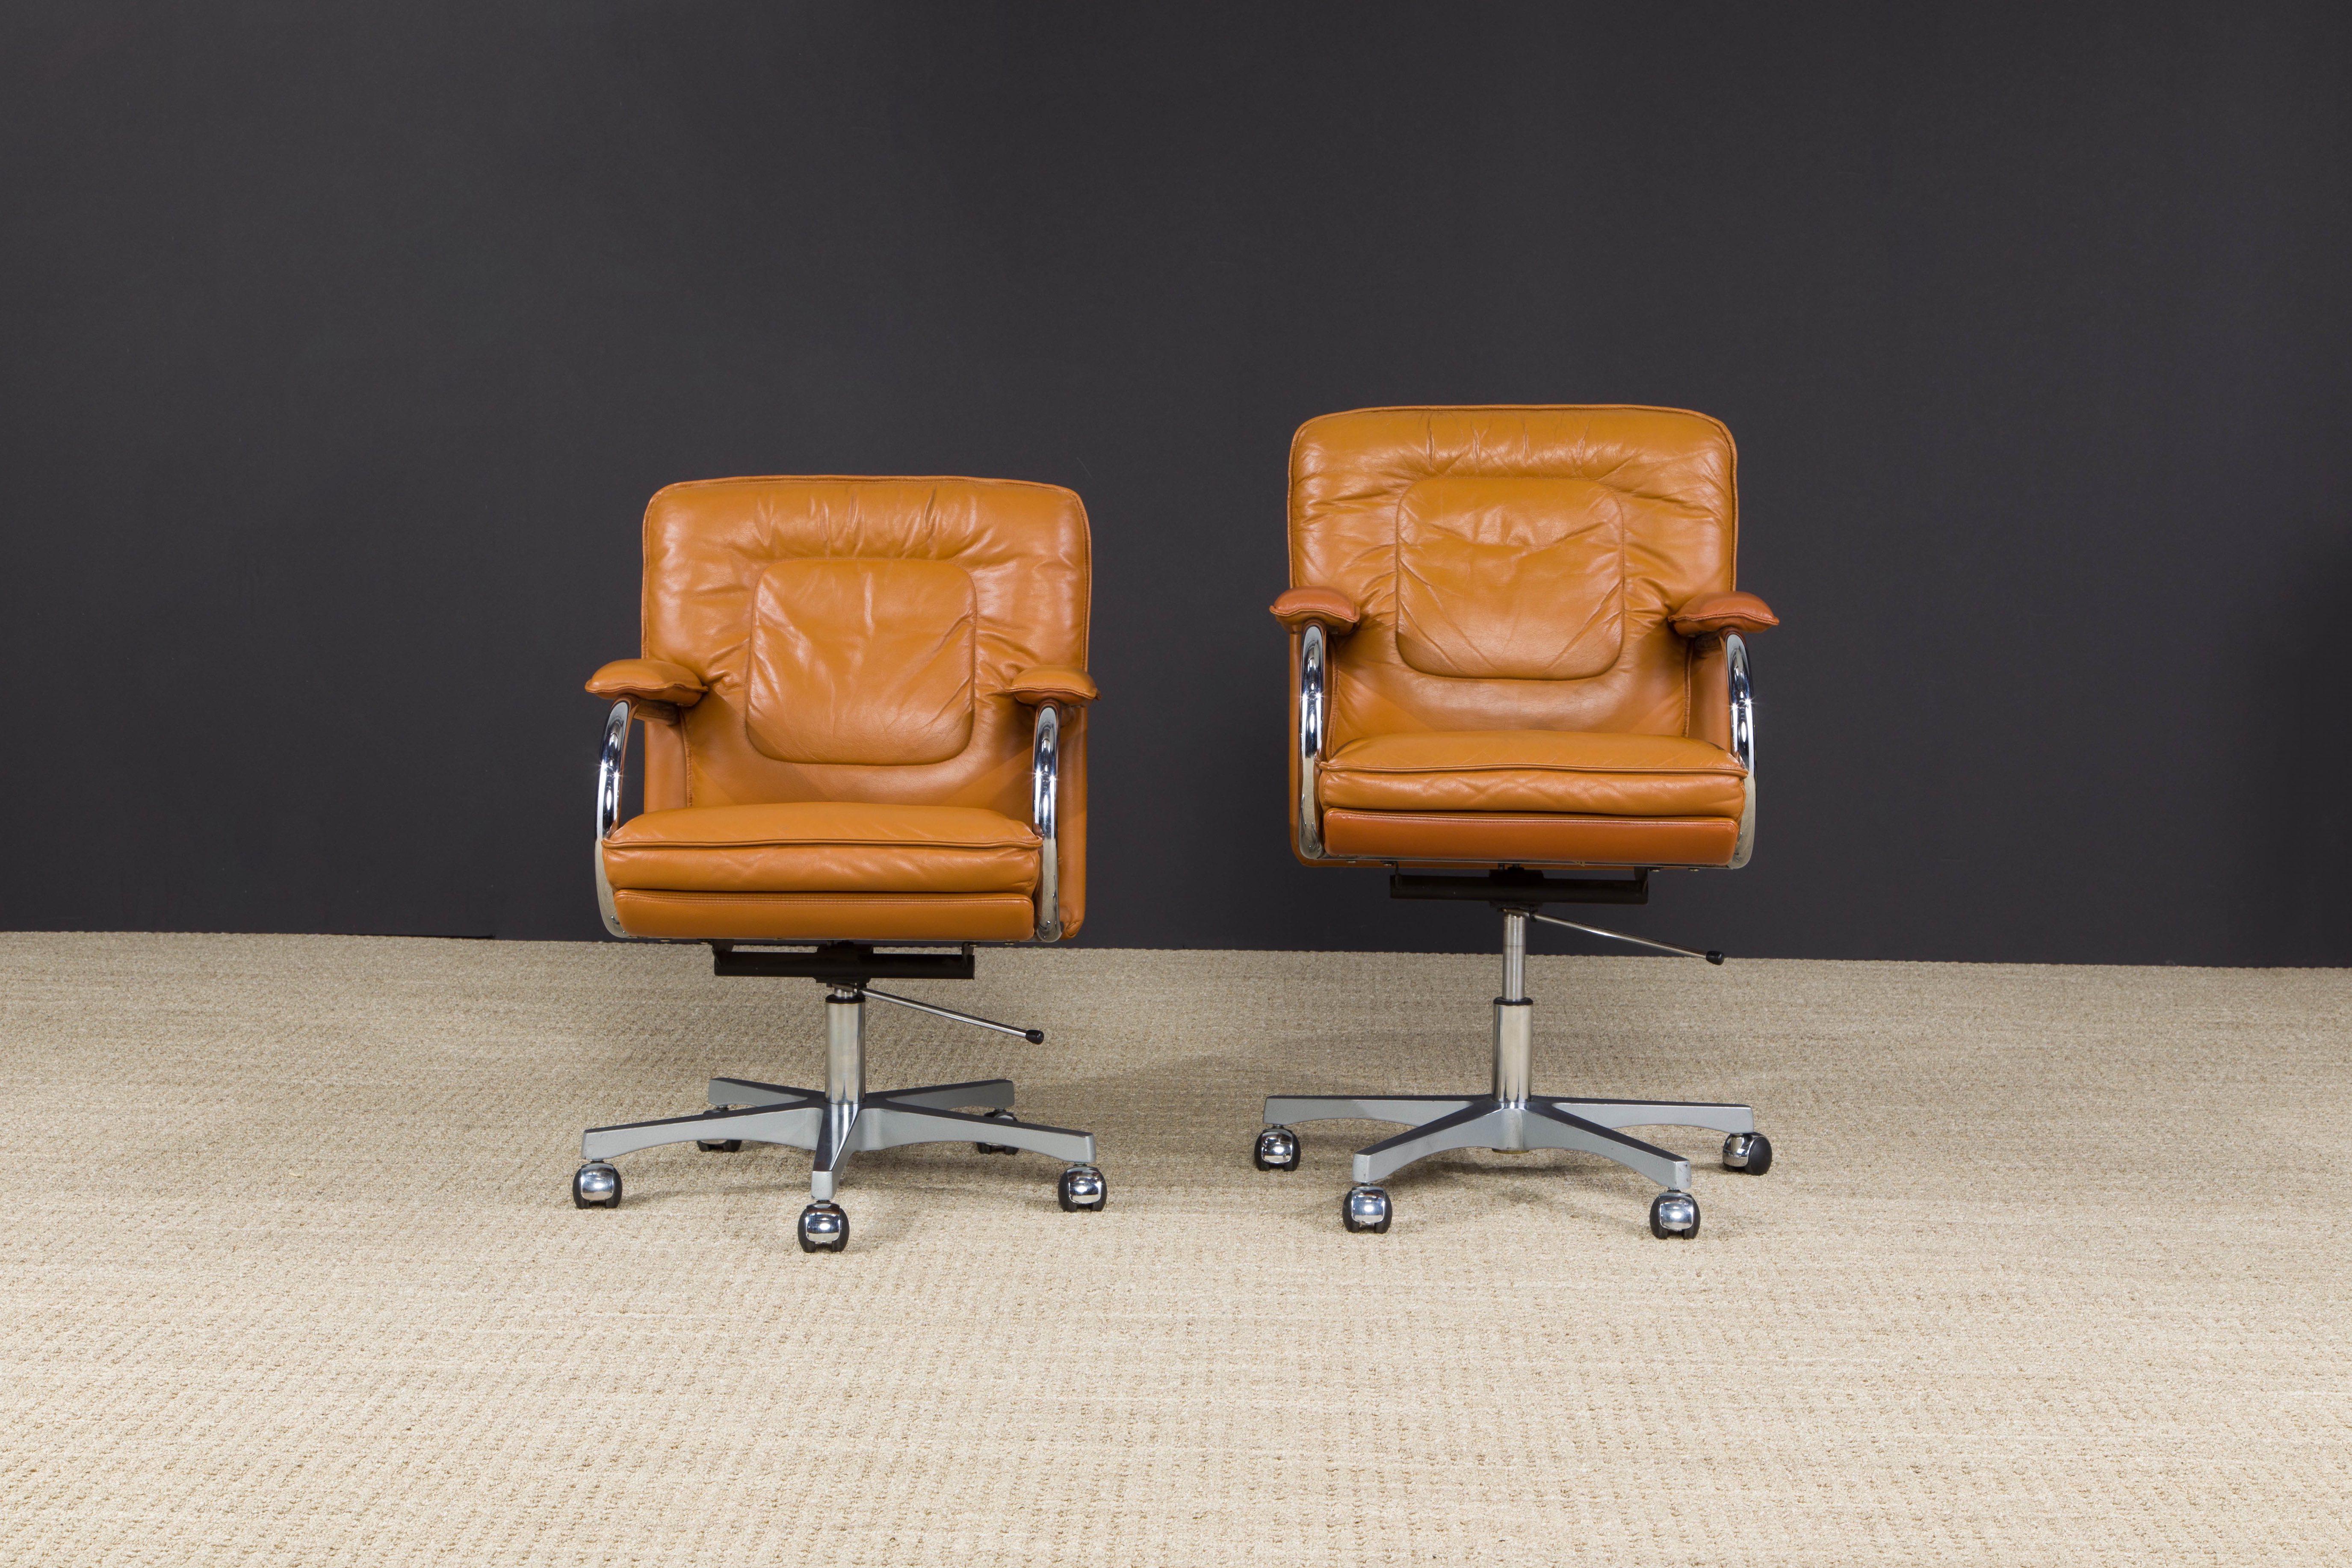 Italian Guido Faleschini Leather Management Desk Chairs for i4 Mariani, c. 1980, Signed